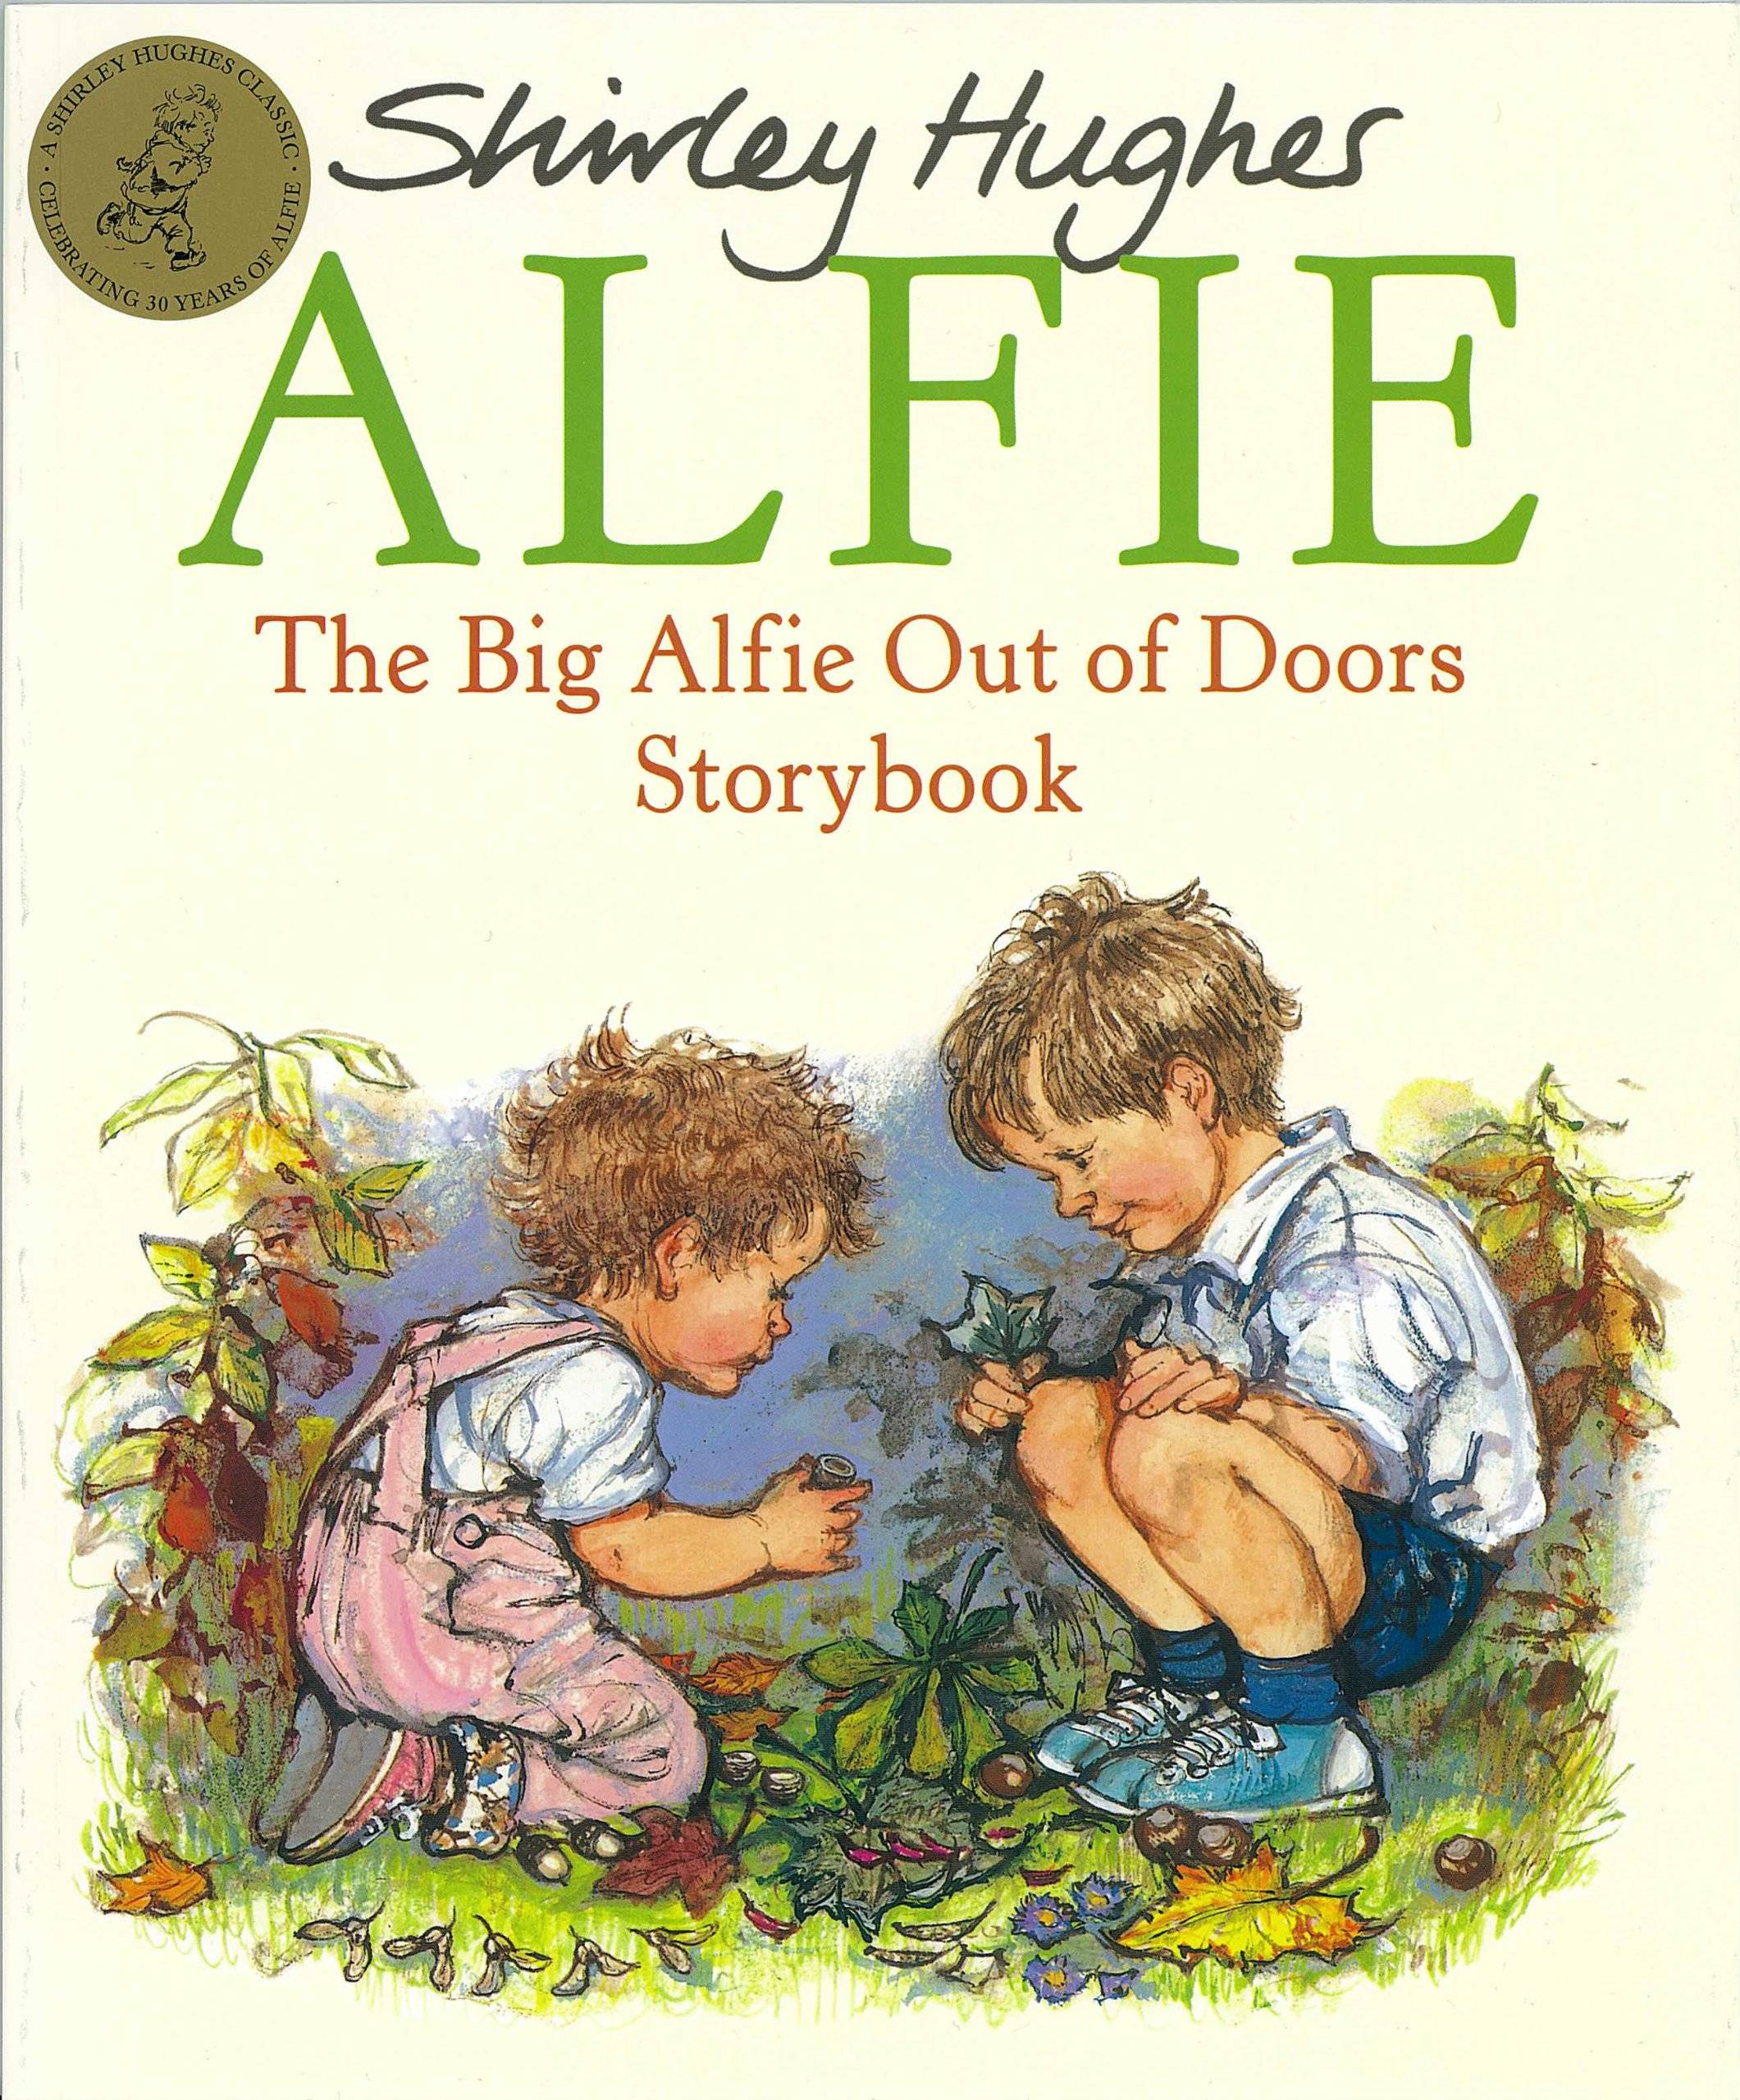 IMG : The Big Alfie out of Doors Storybook